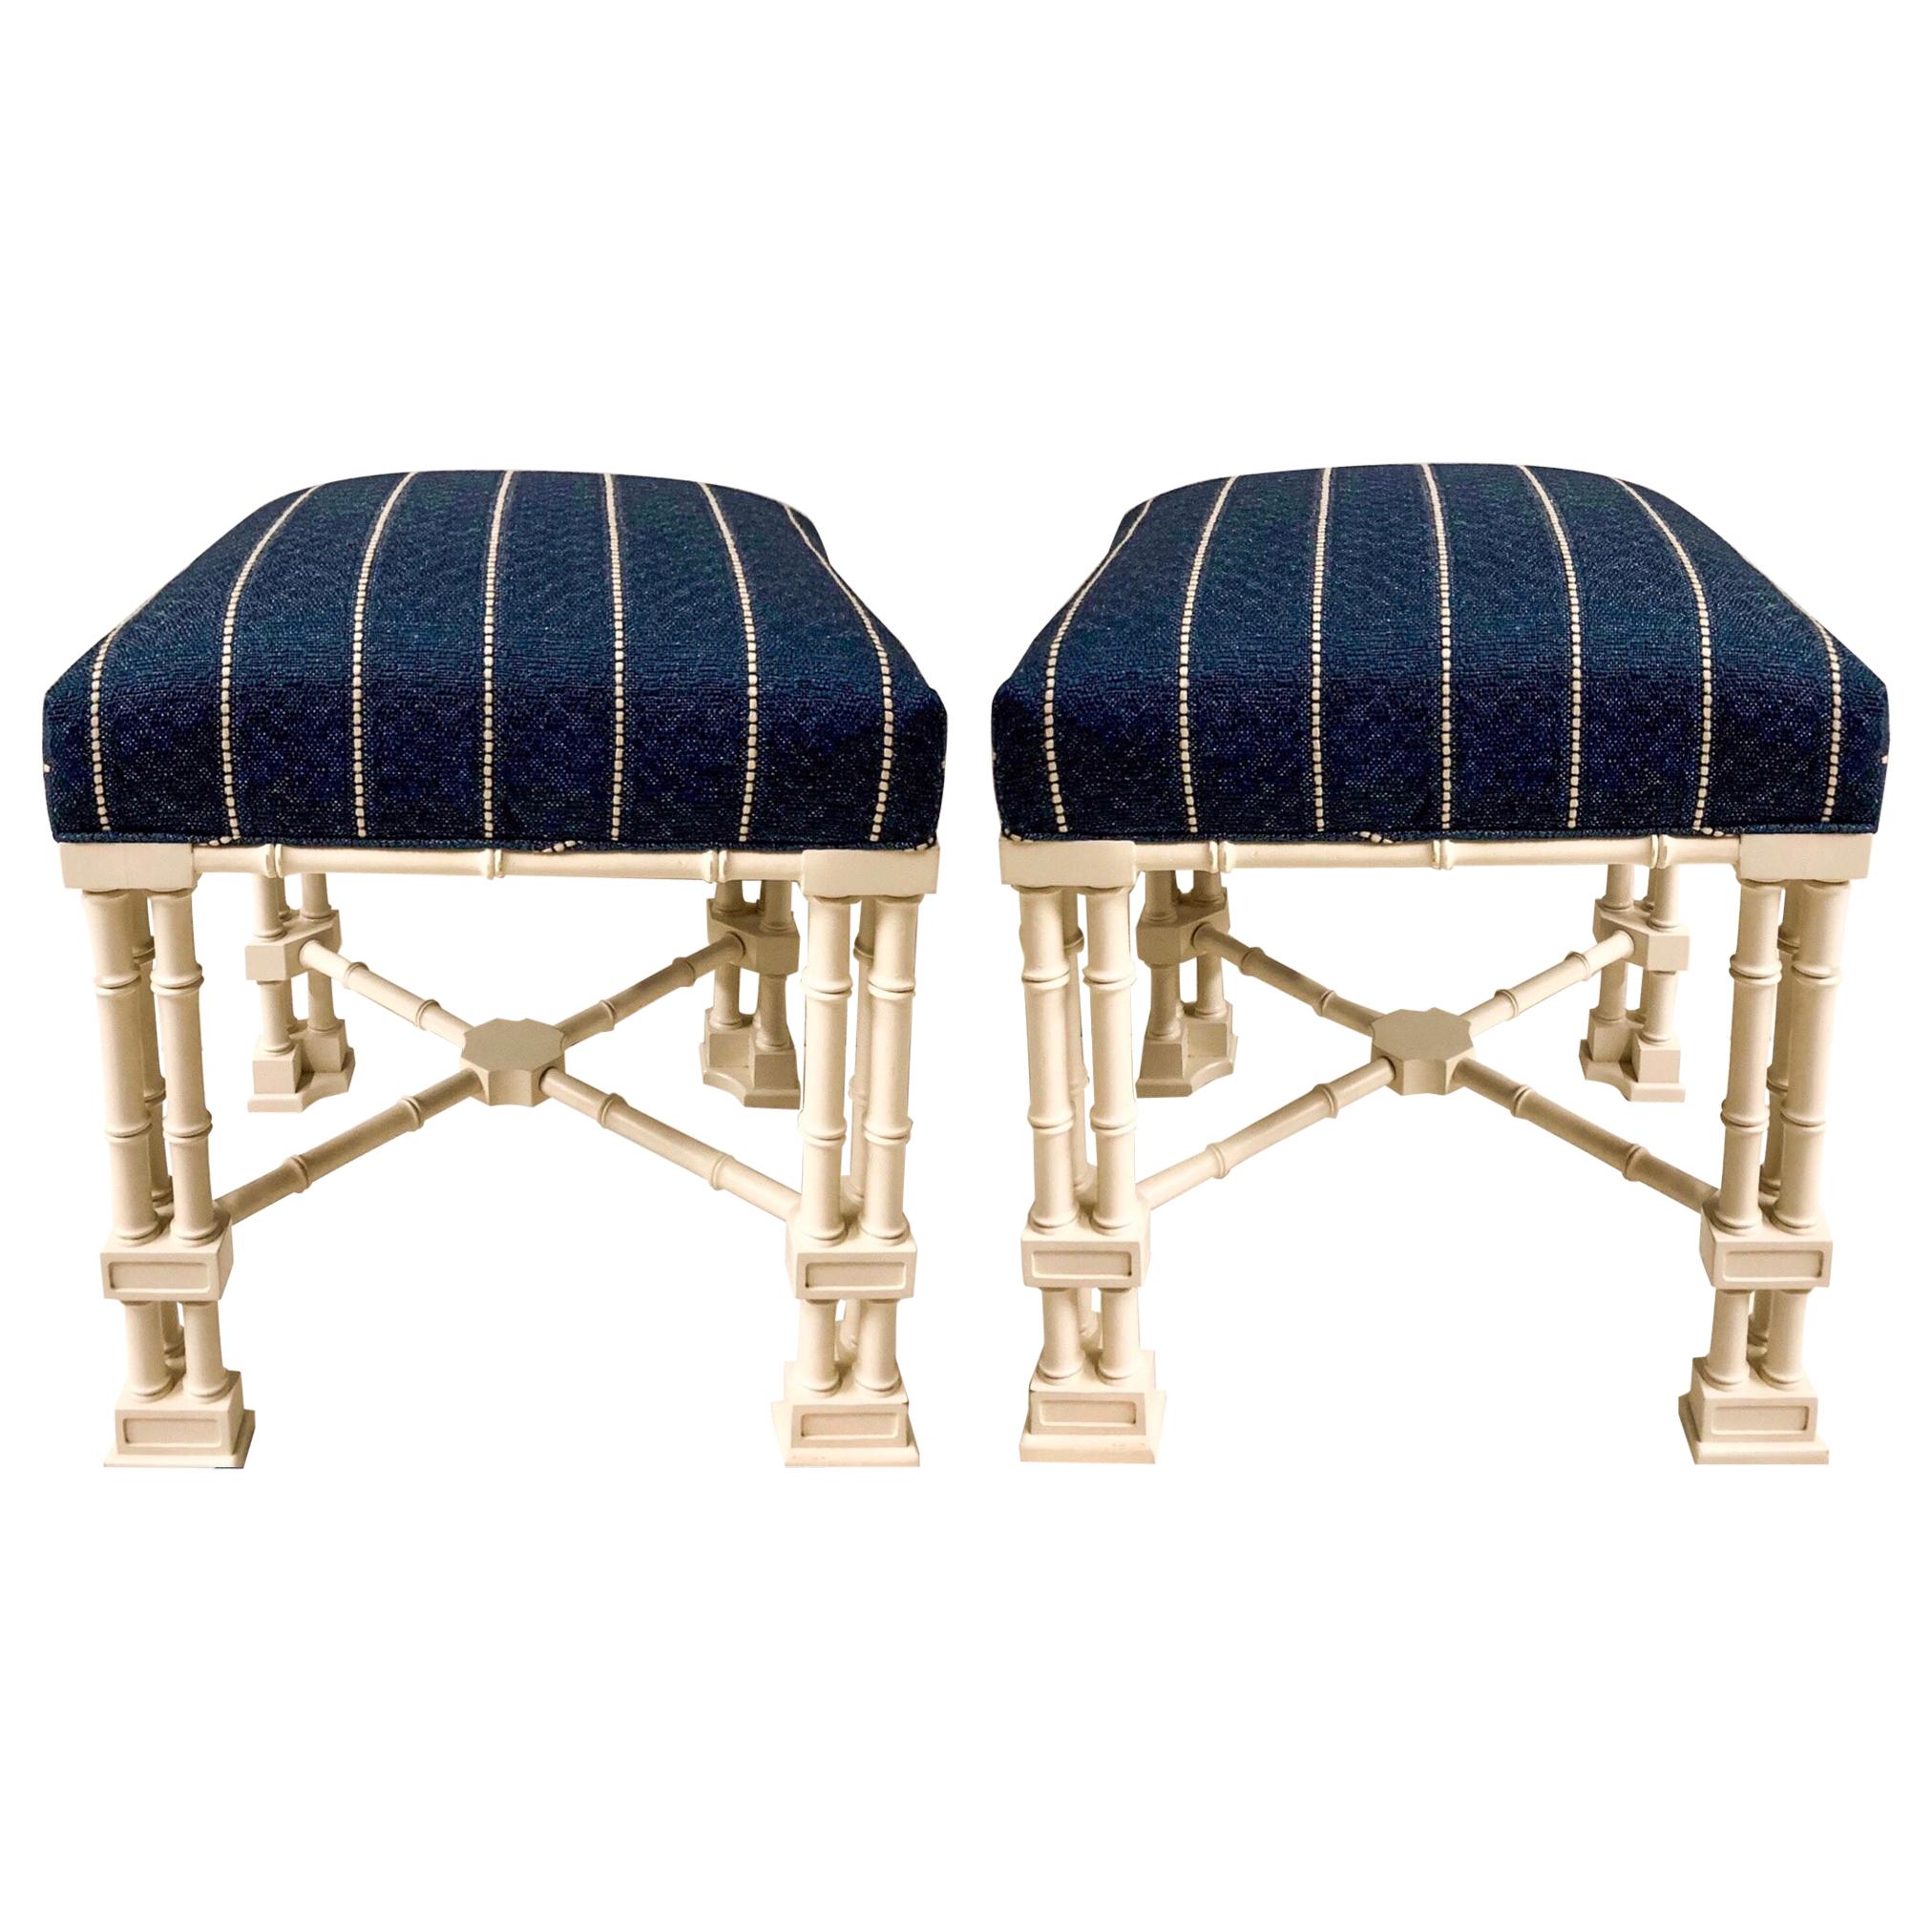 1970s Erwin Lambeth Chinese Chippendale Style Ottomans, a Pair